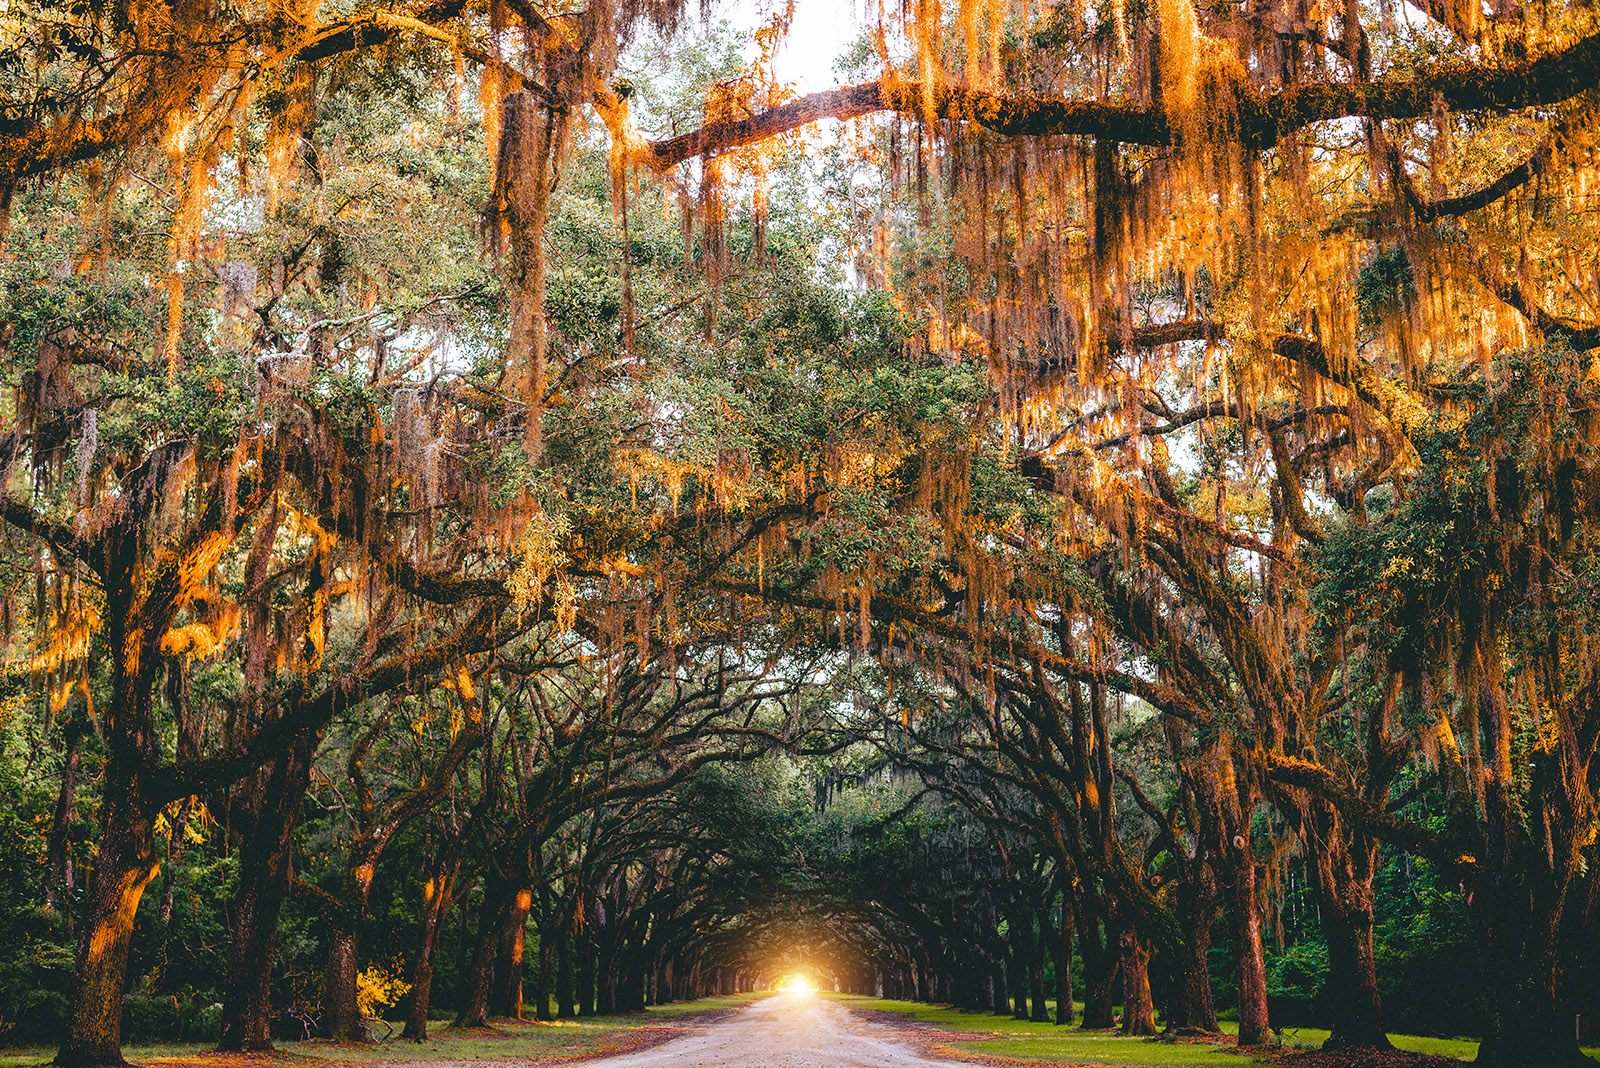 trees at sunset draped with spanish moss